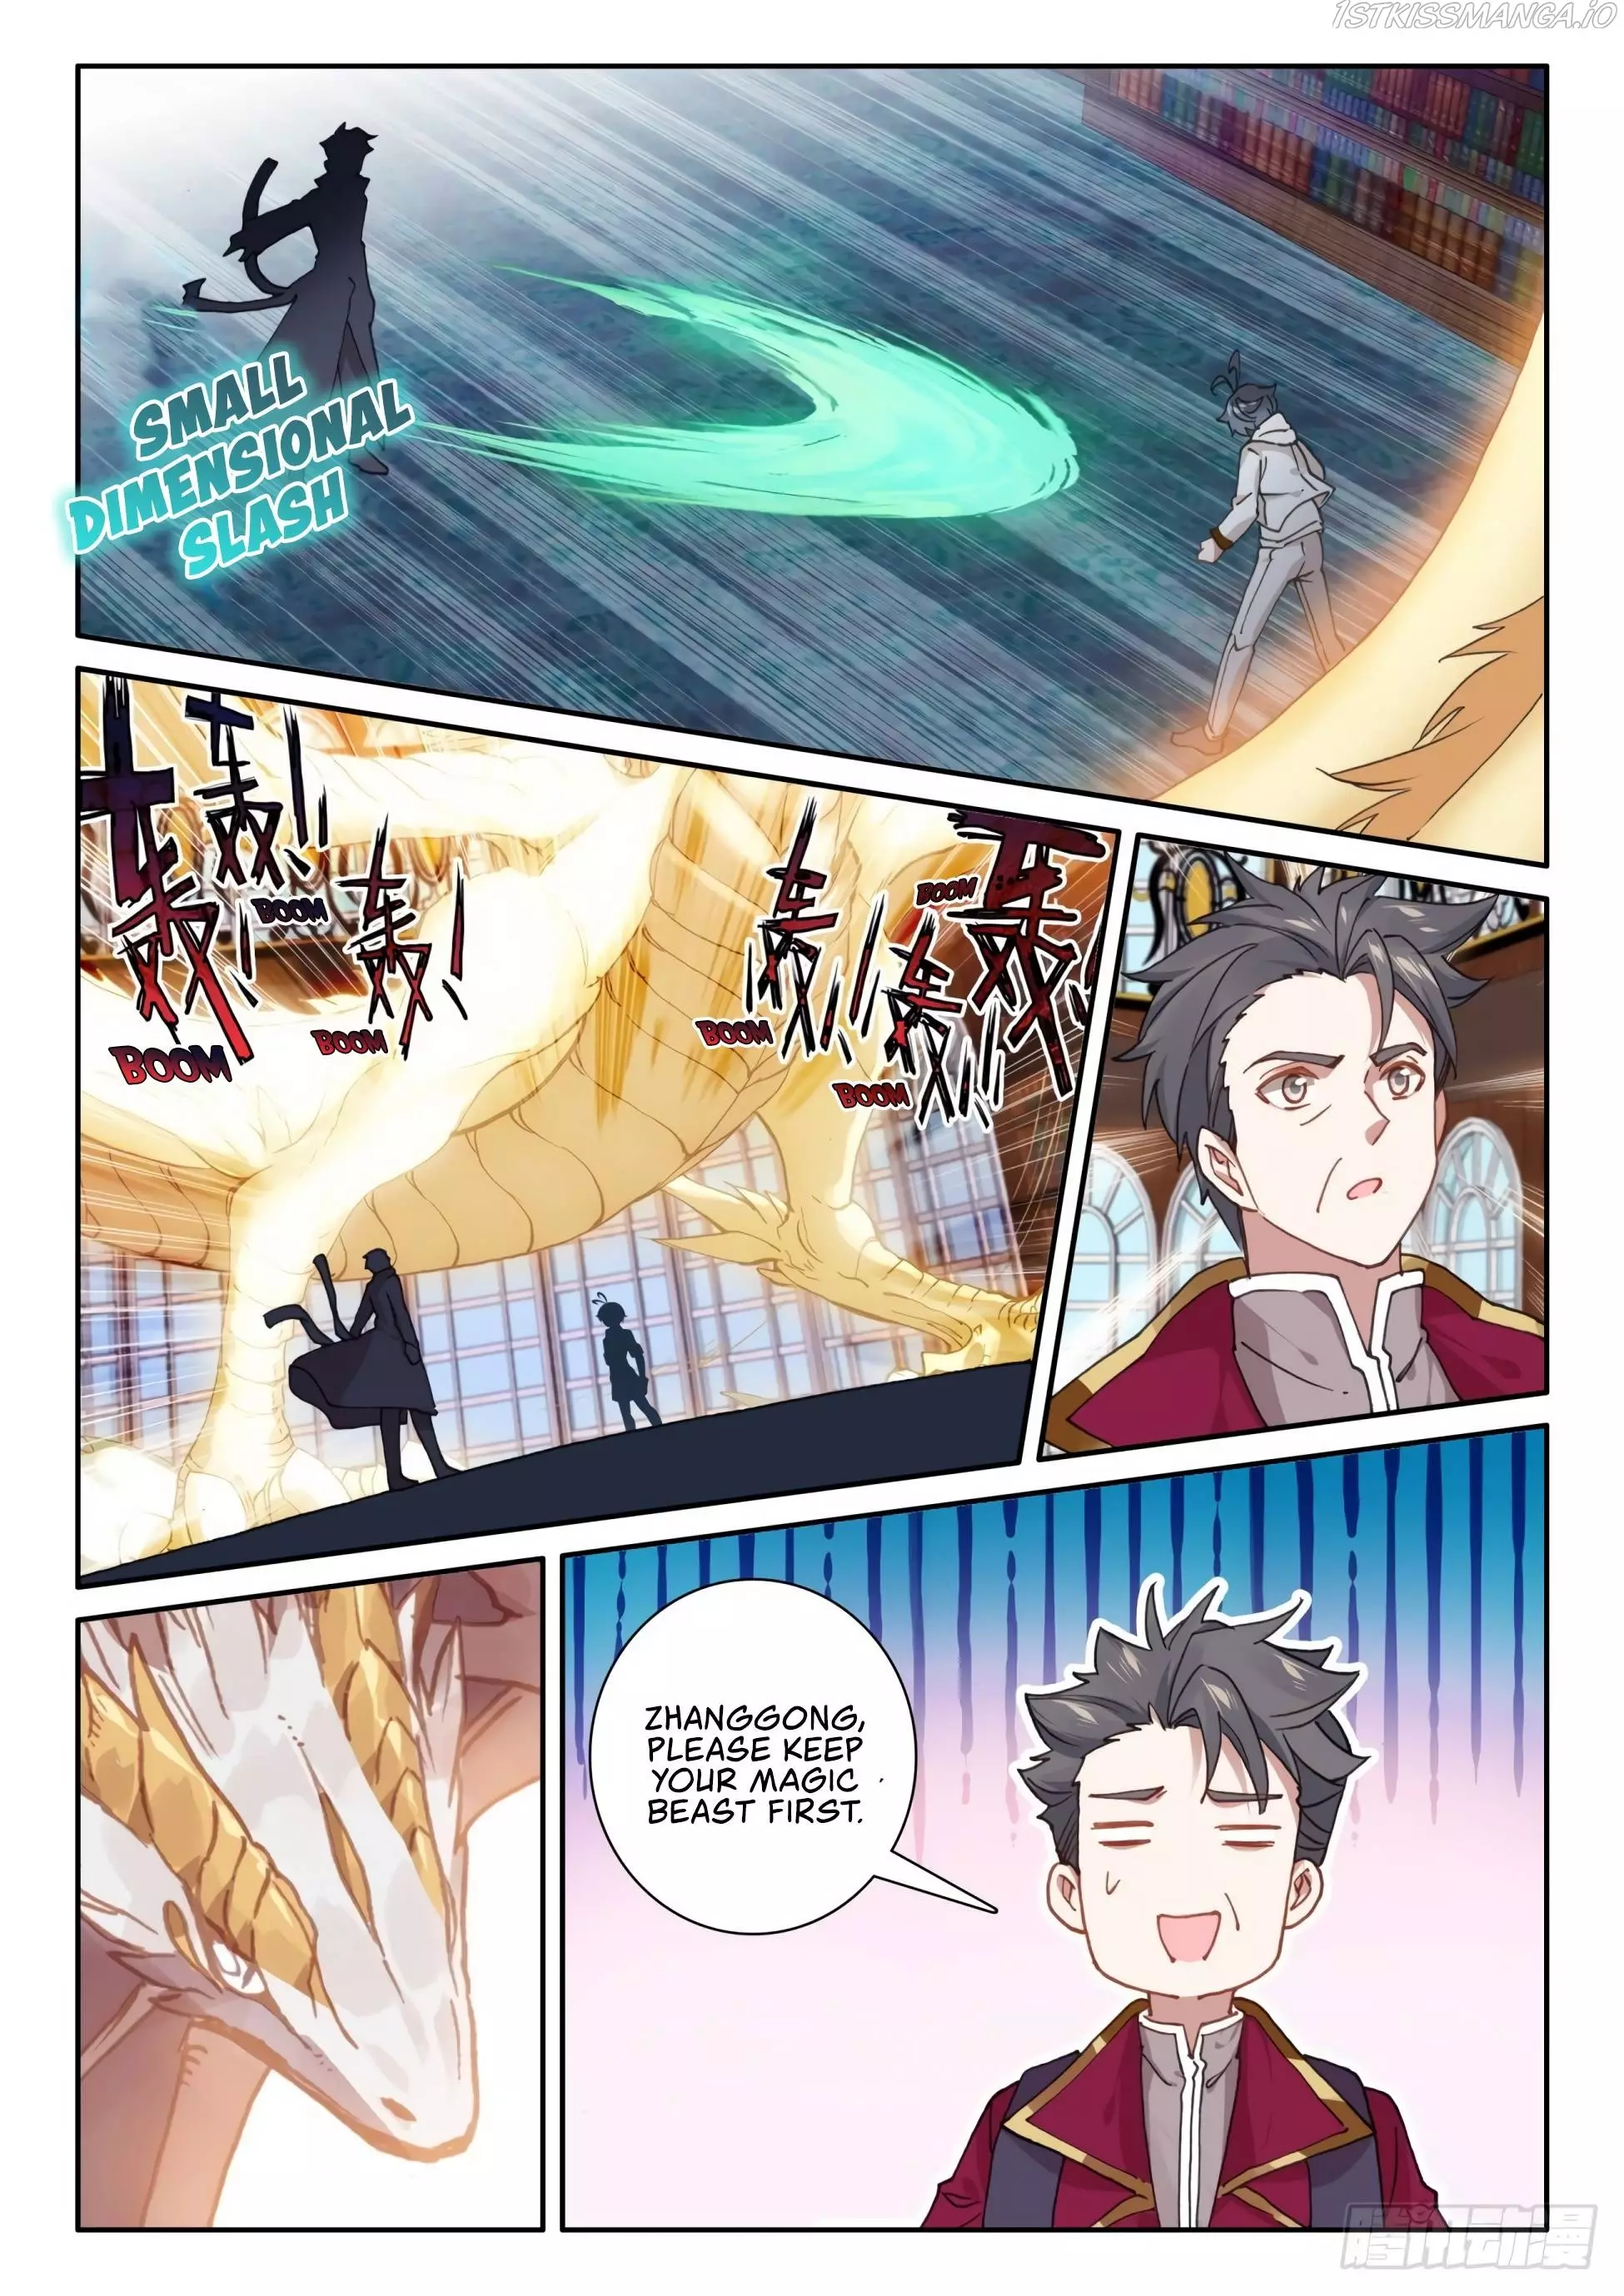 The Child of Light - 50.1 page 10-18483b40